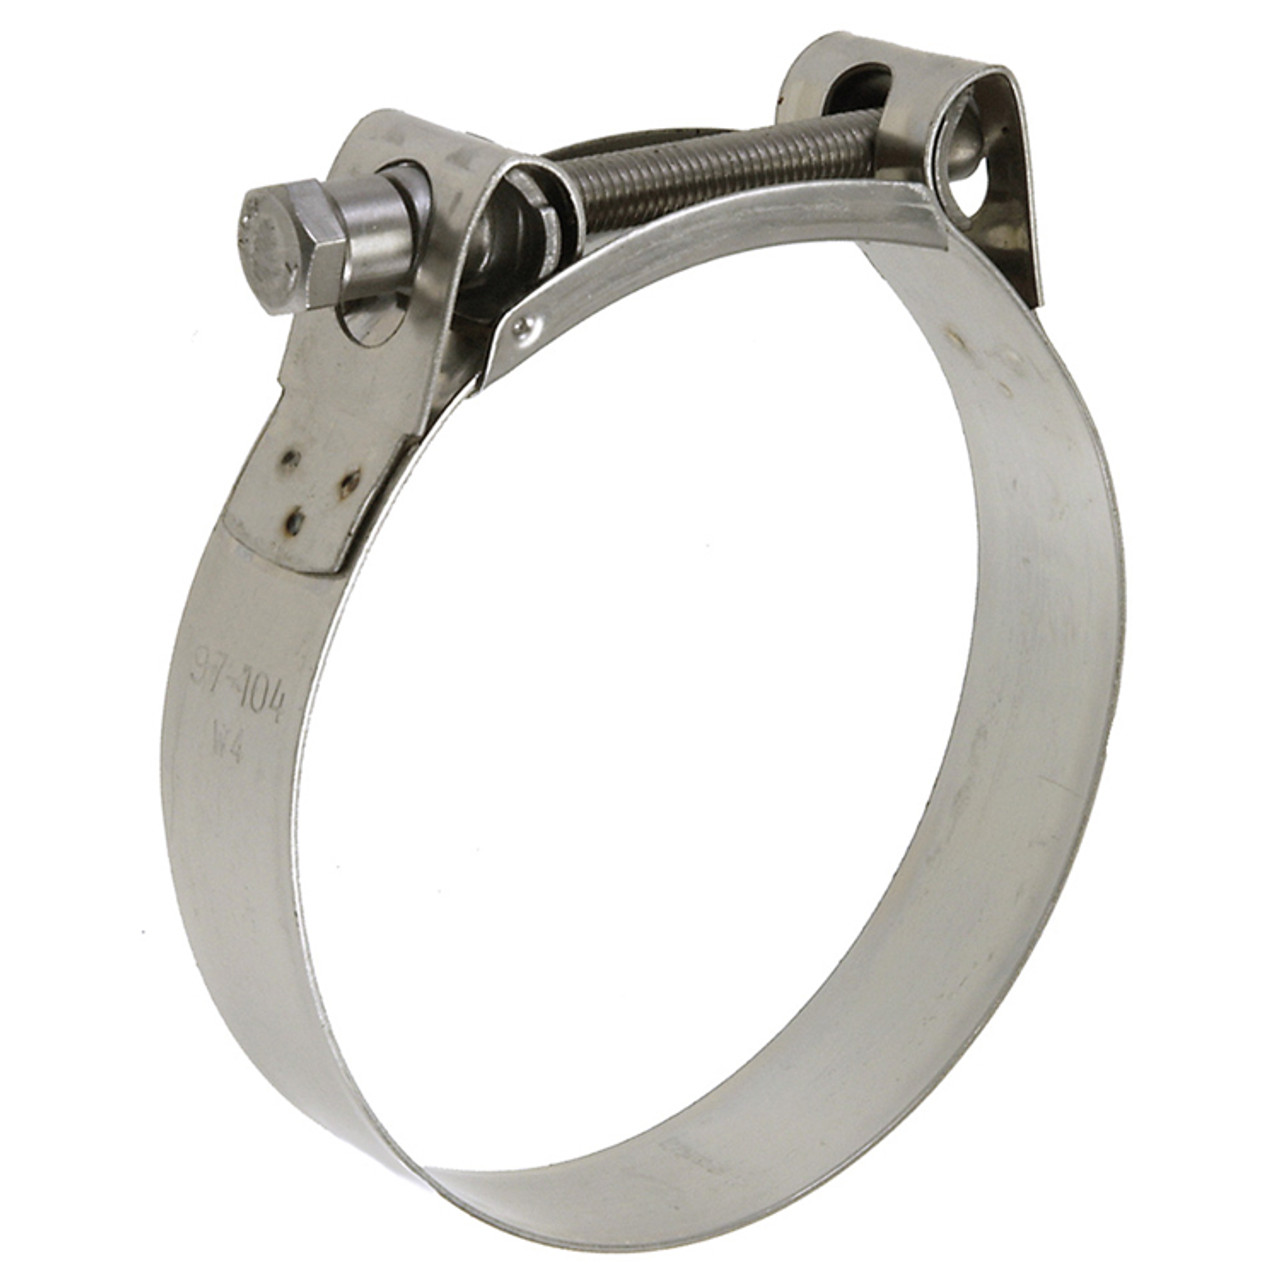 3.82 - 4.09" All Stainless T-Bolt Clamp  G94-97104